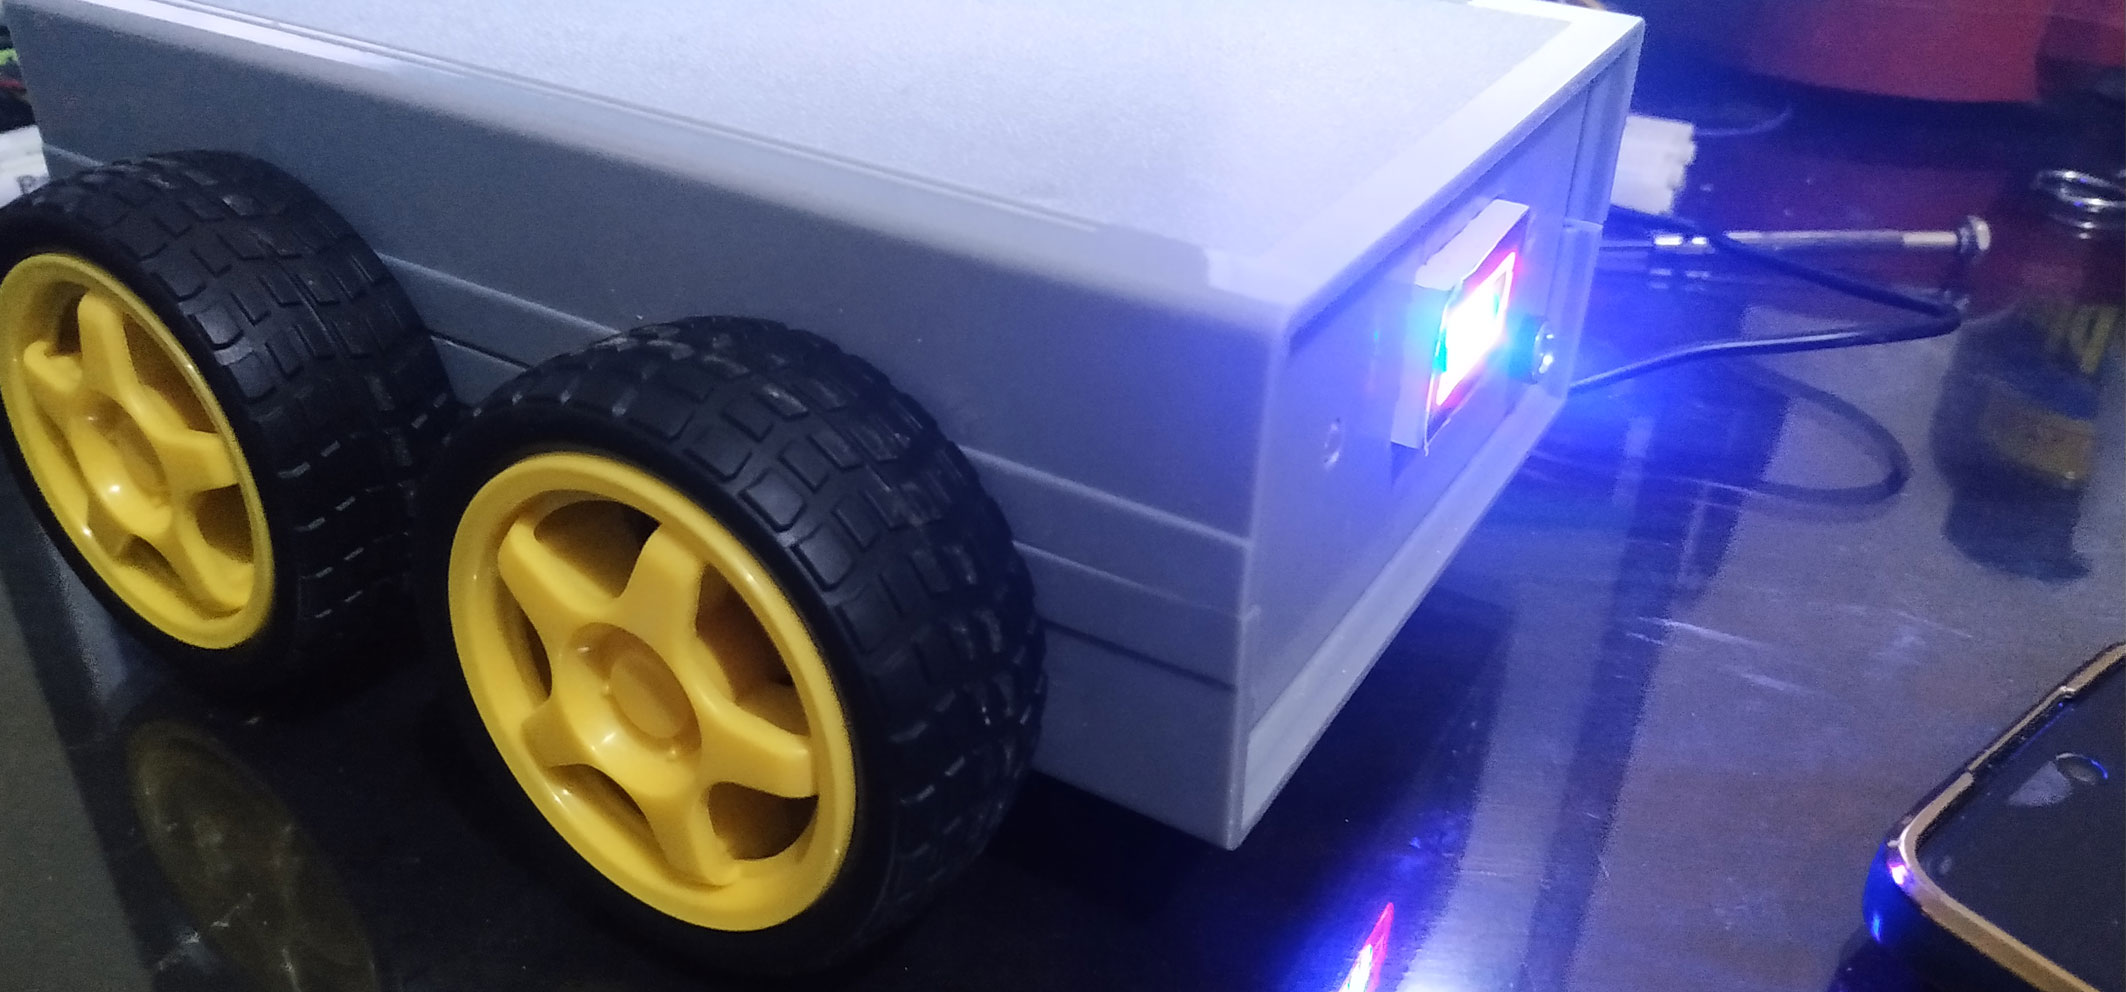 Robot car is controlled by a smartphone through wi-fi